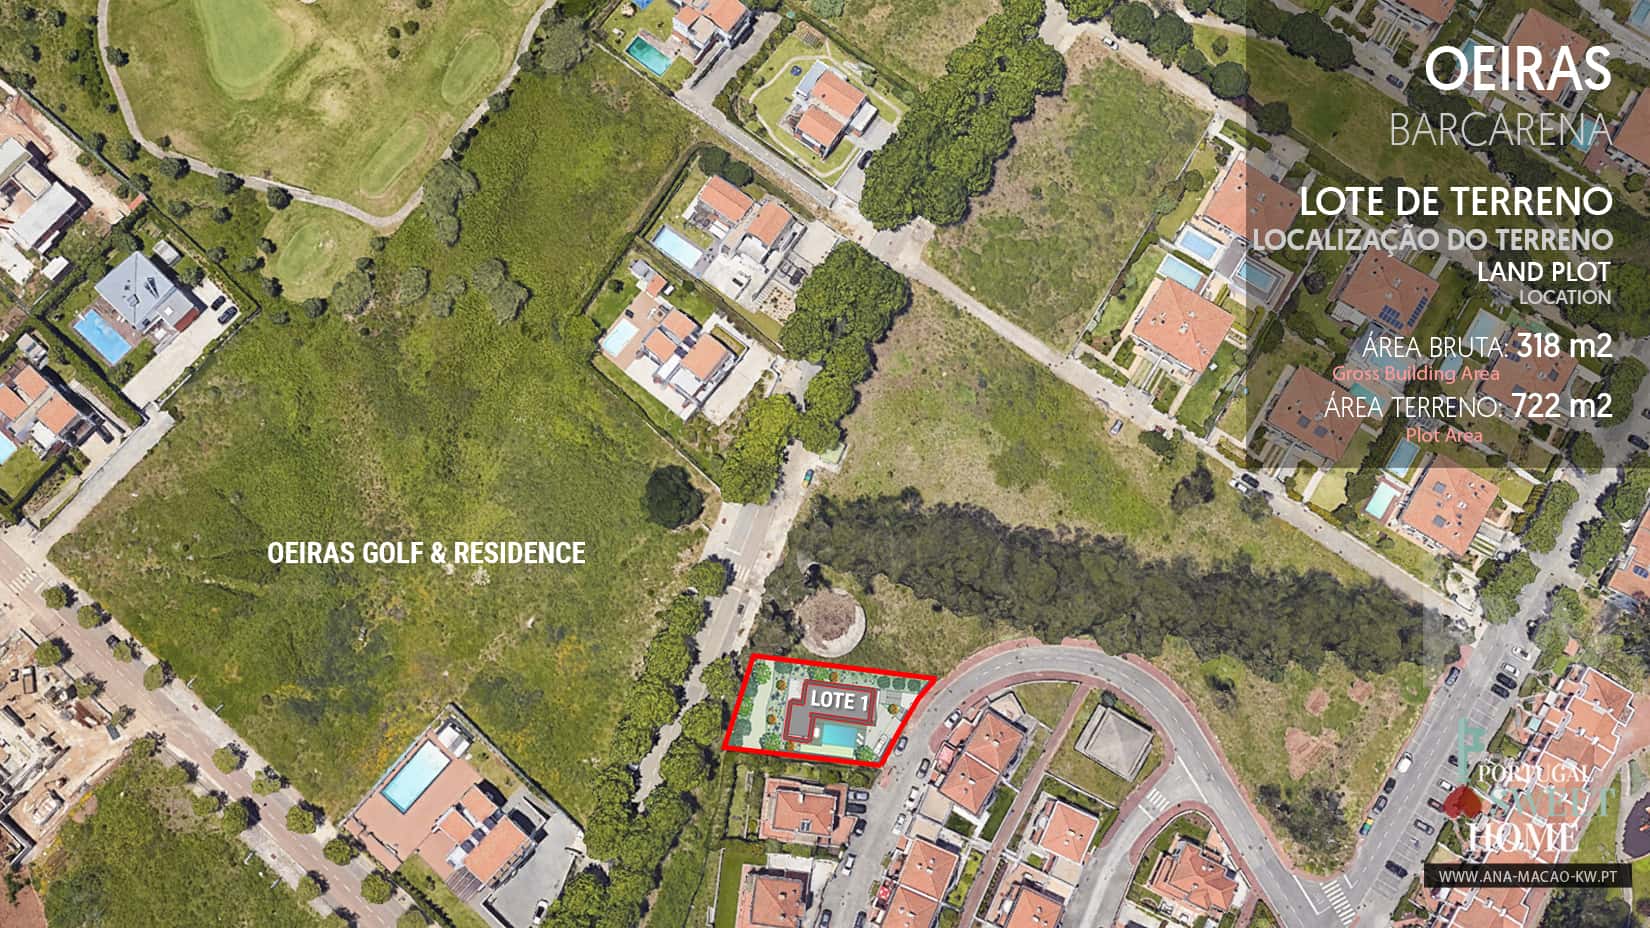 Location of the Plot of Land next to Oeiras Golf & Residence